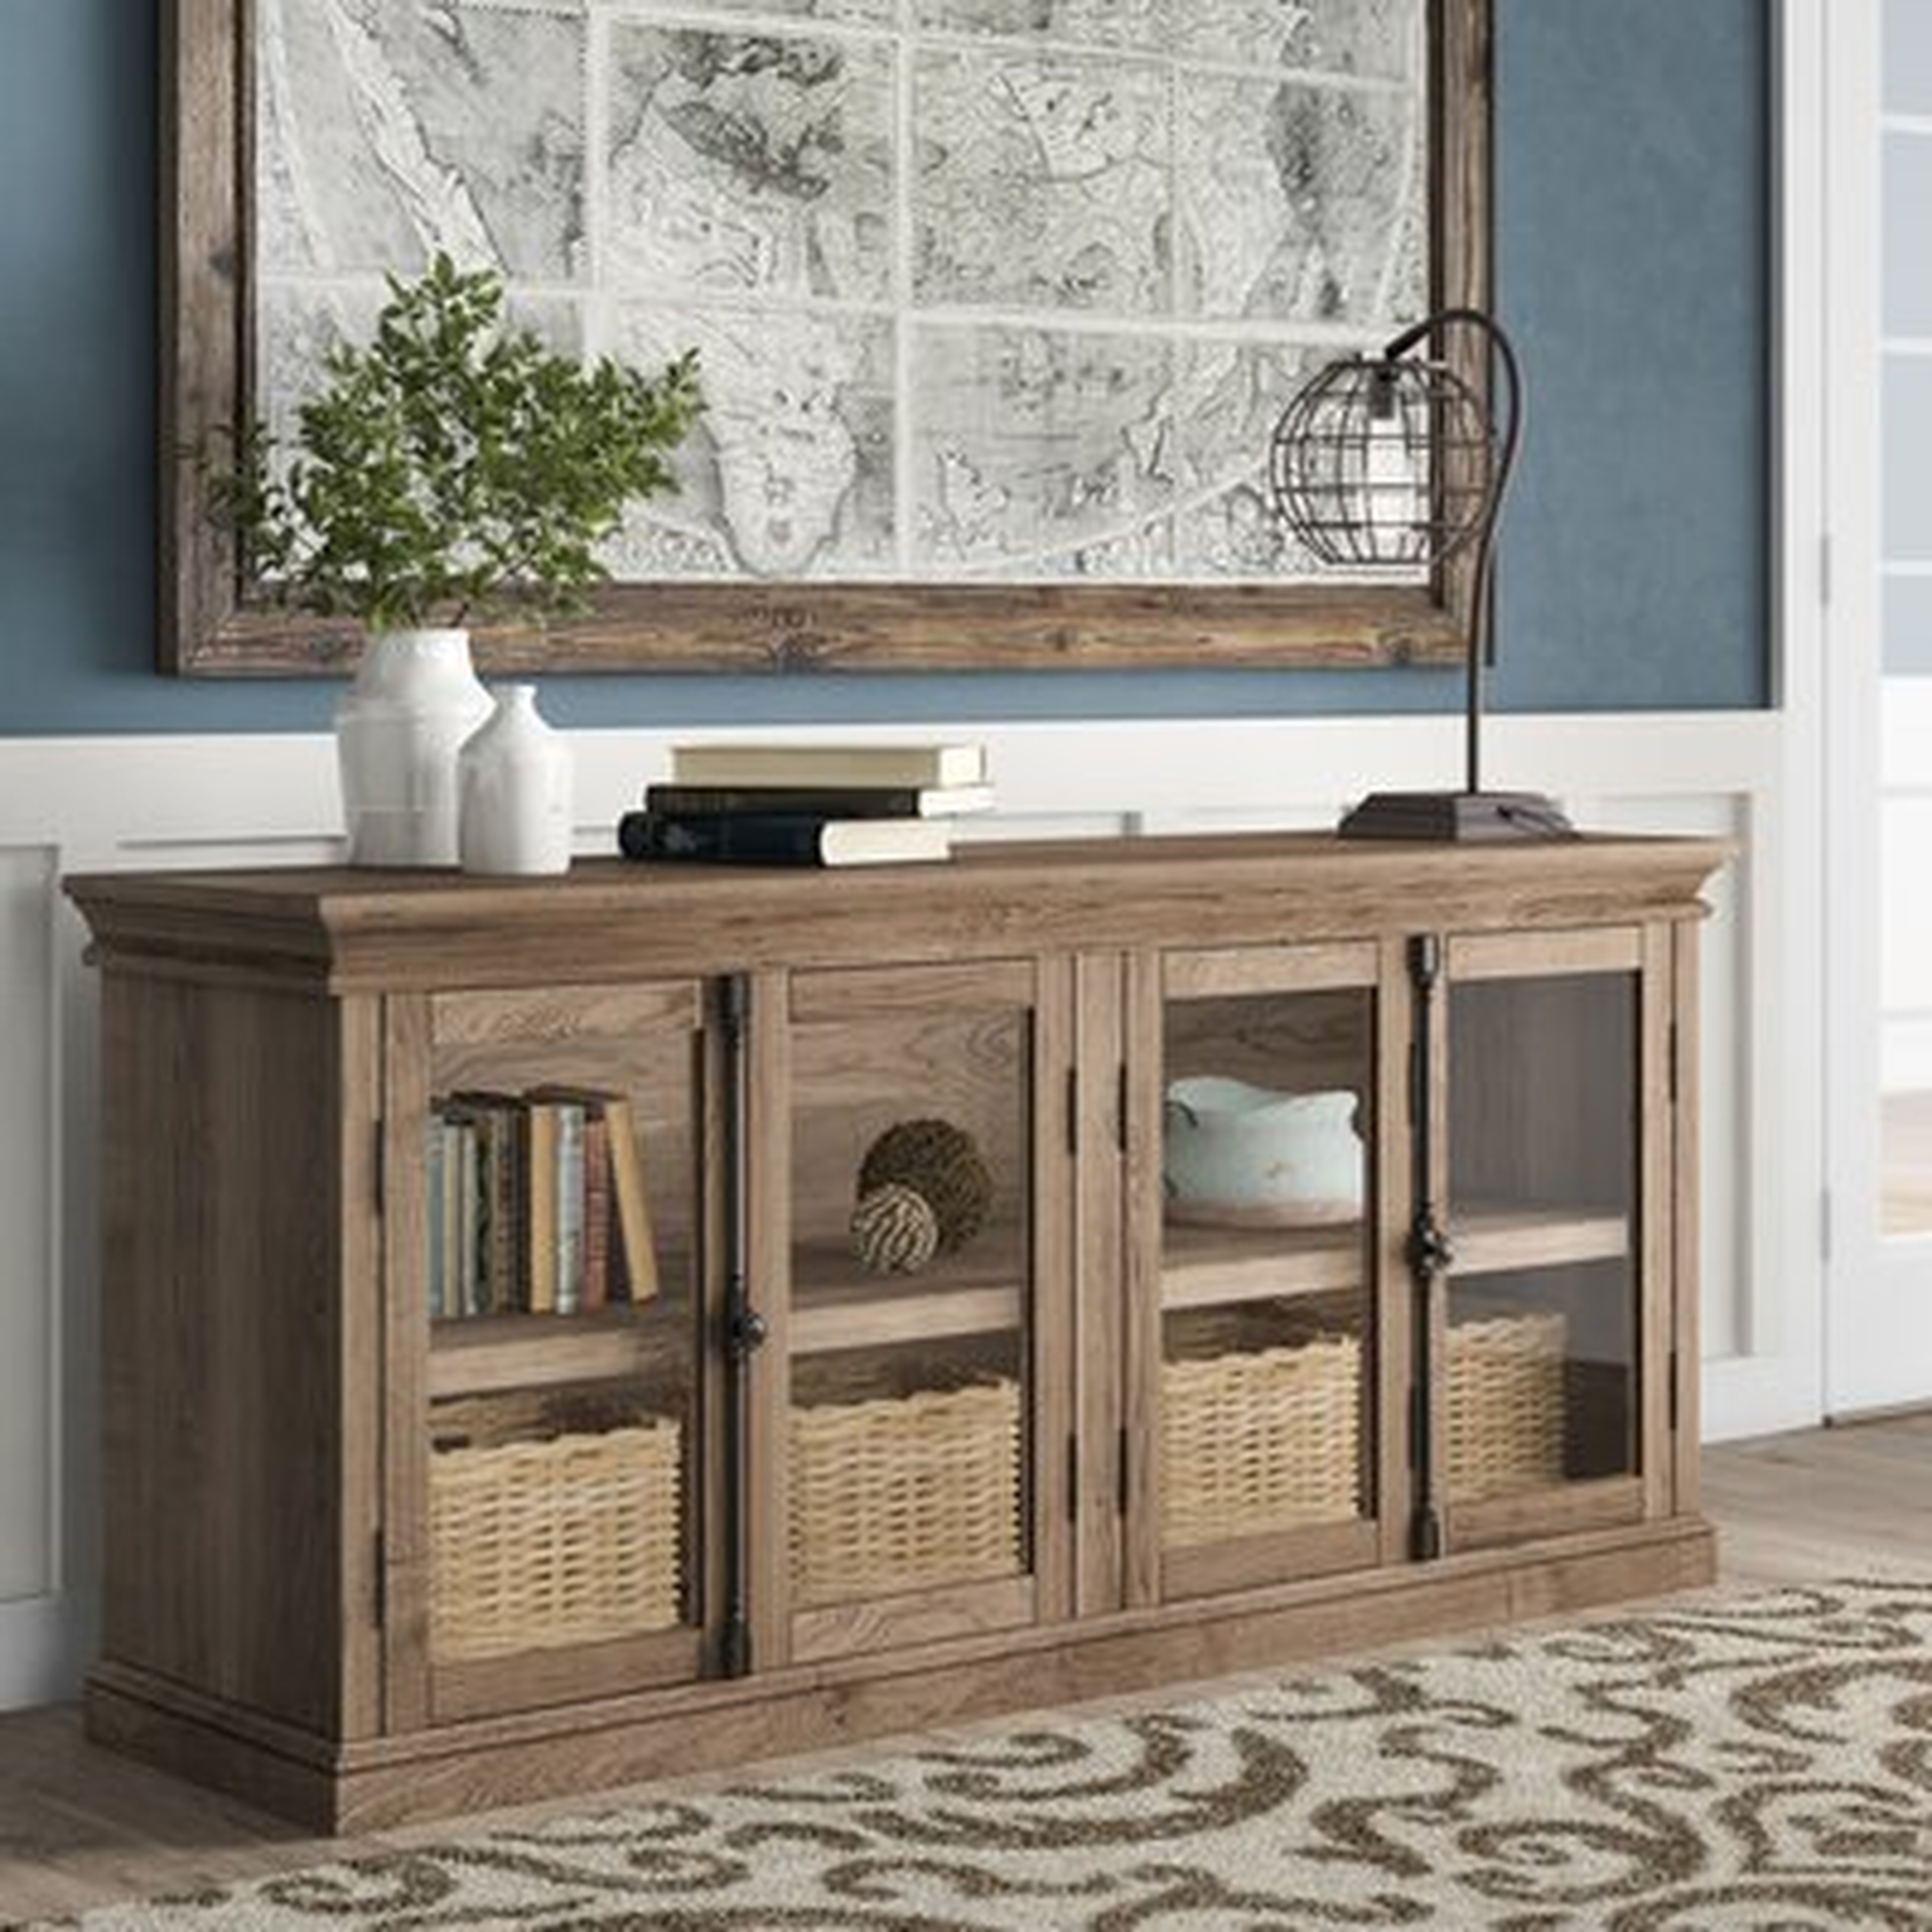 Edney TV Stand for TVs up to 80 inches - Birch Lane